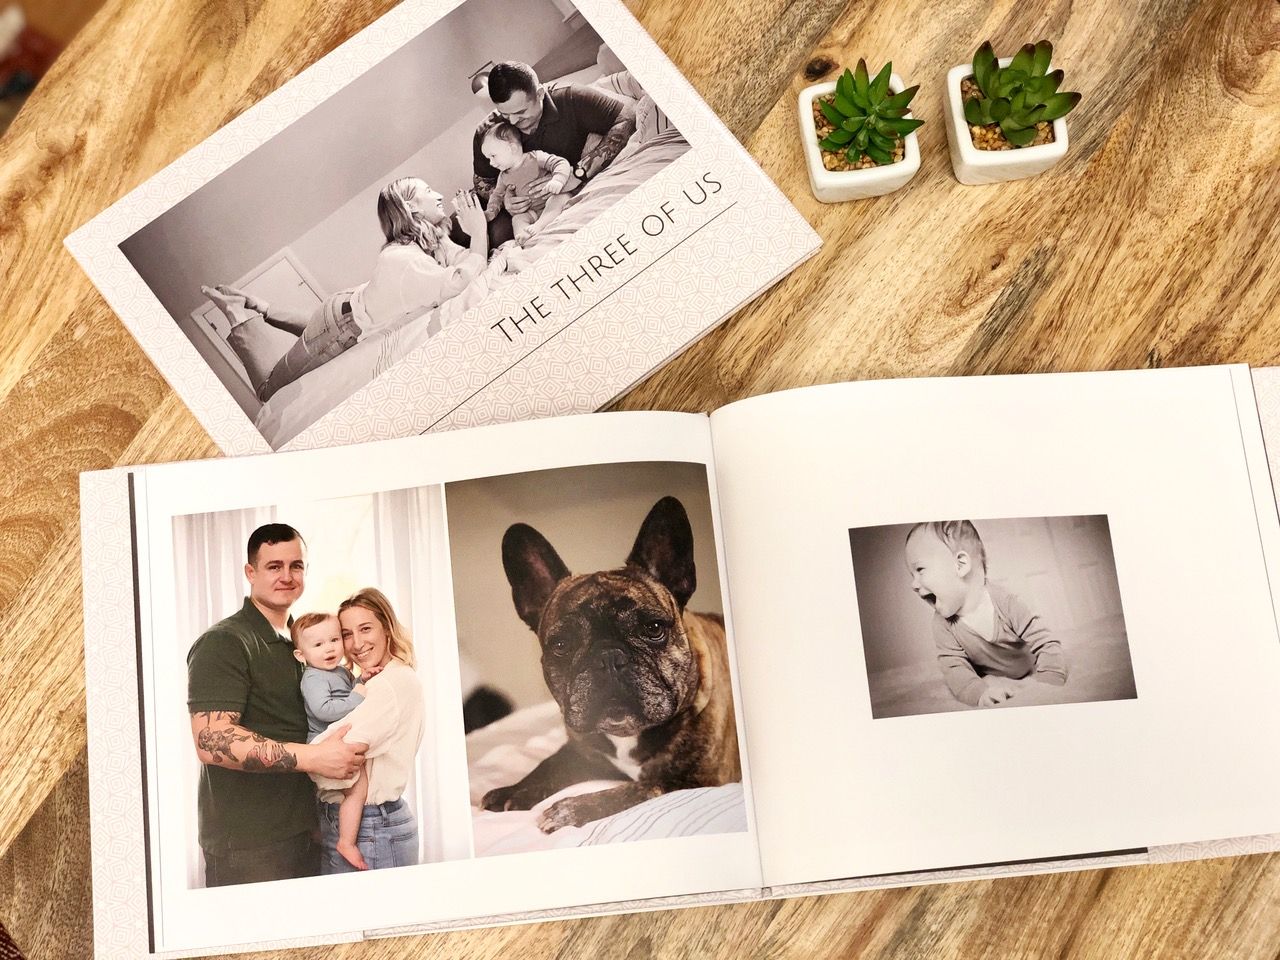 Gift the grandparents with an updated family photo album showing your love and gratitude